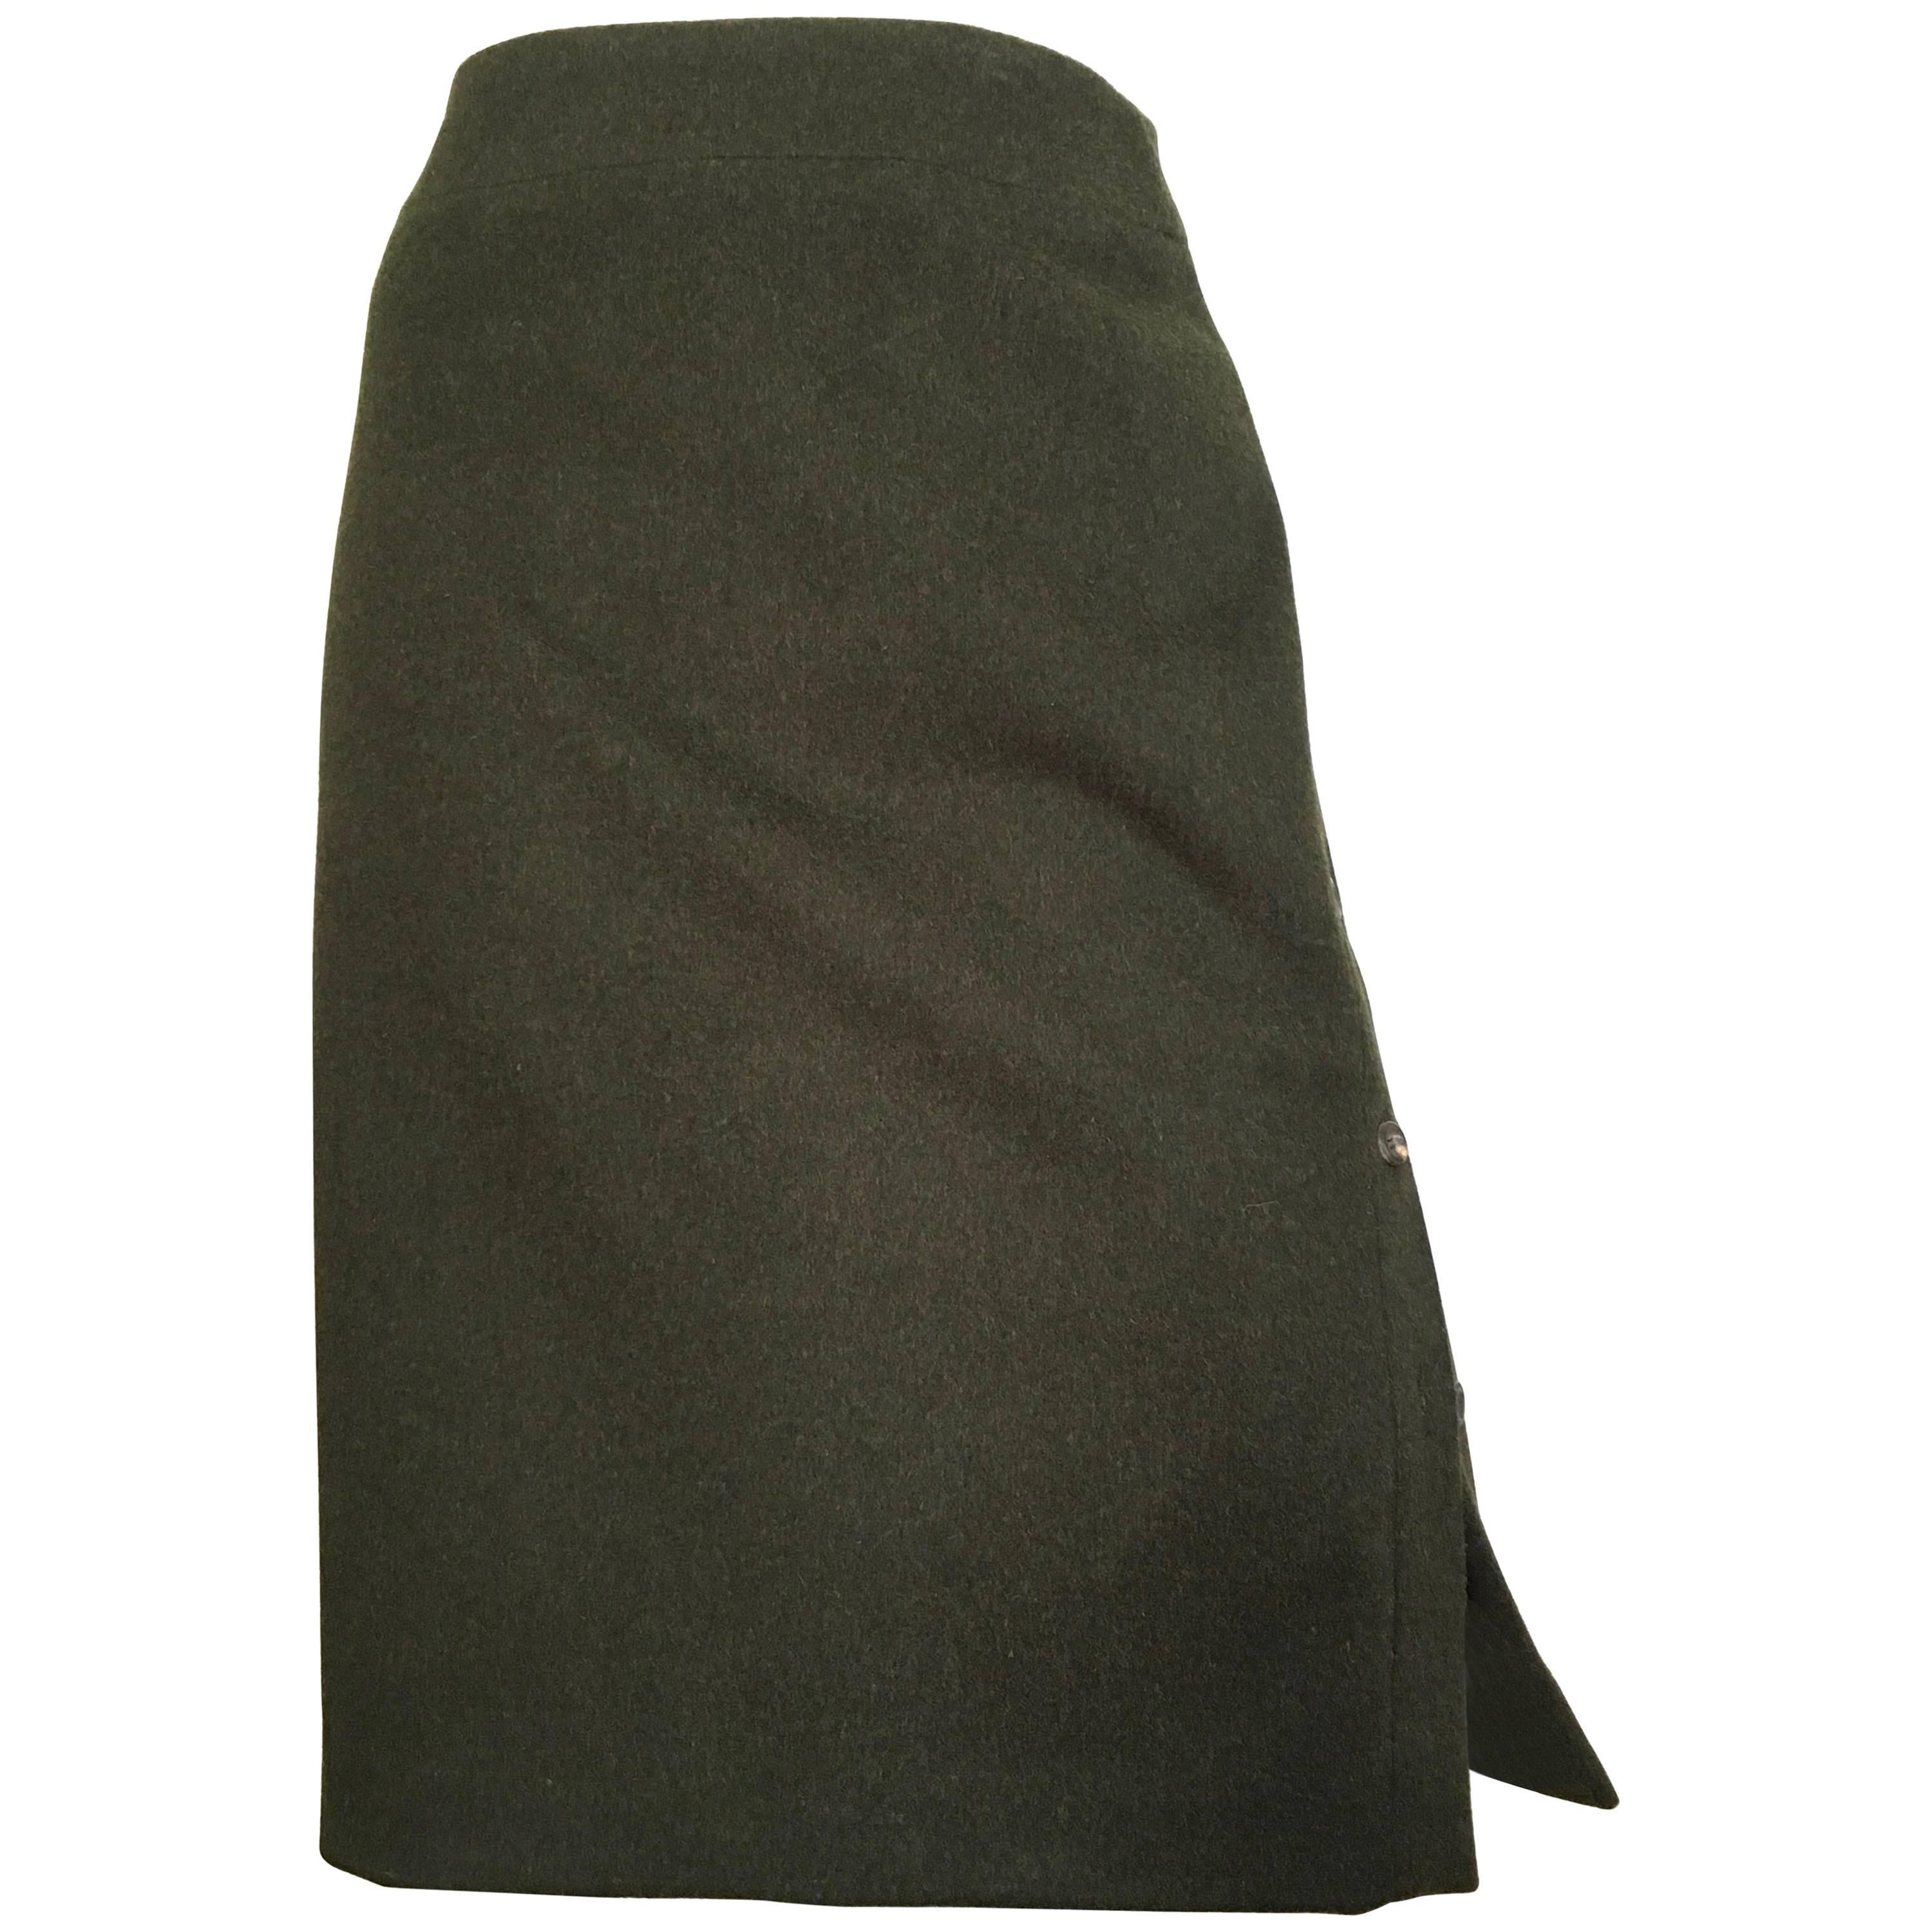 Carolina Herrera for Saks Olive Brushed Wool Skirt Size 10 Made in Italy. For Sale